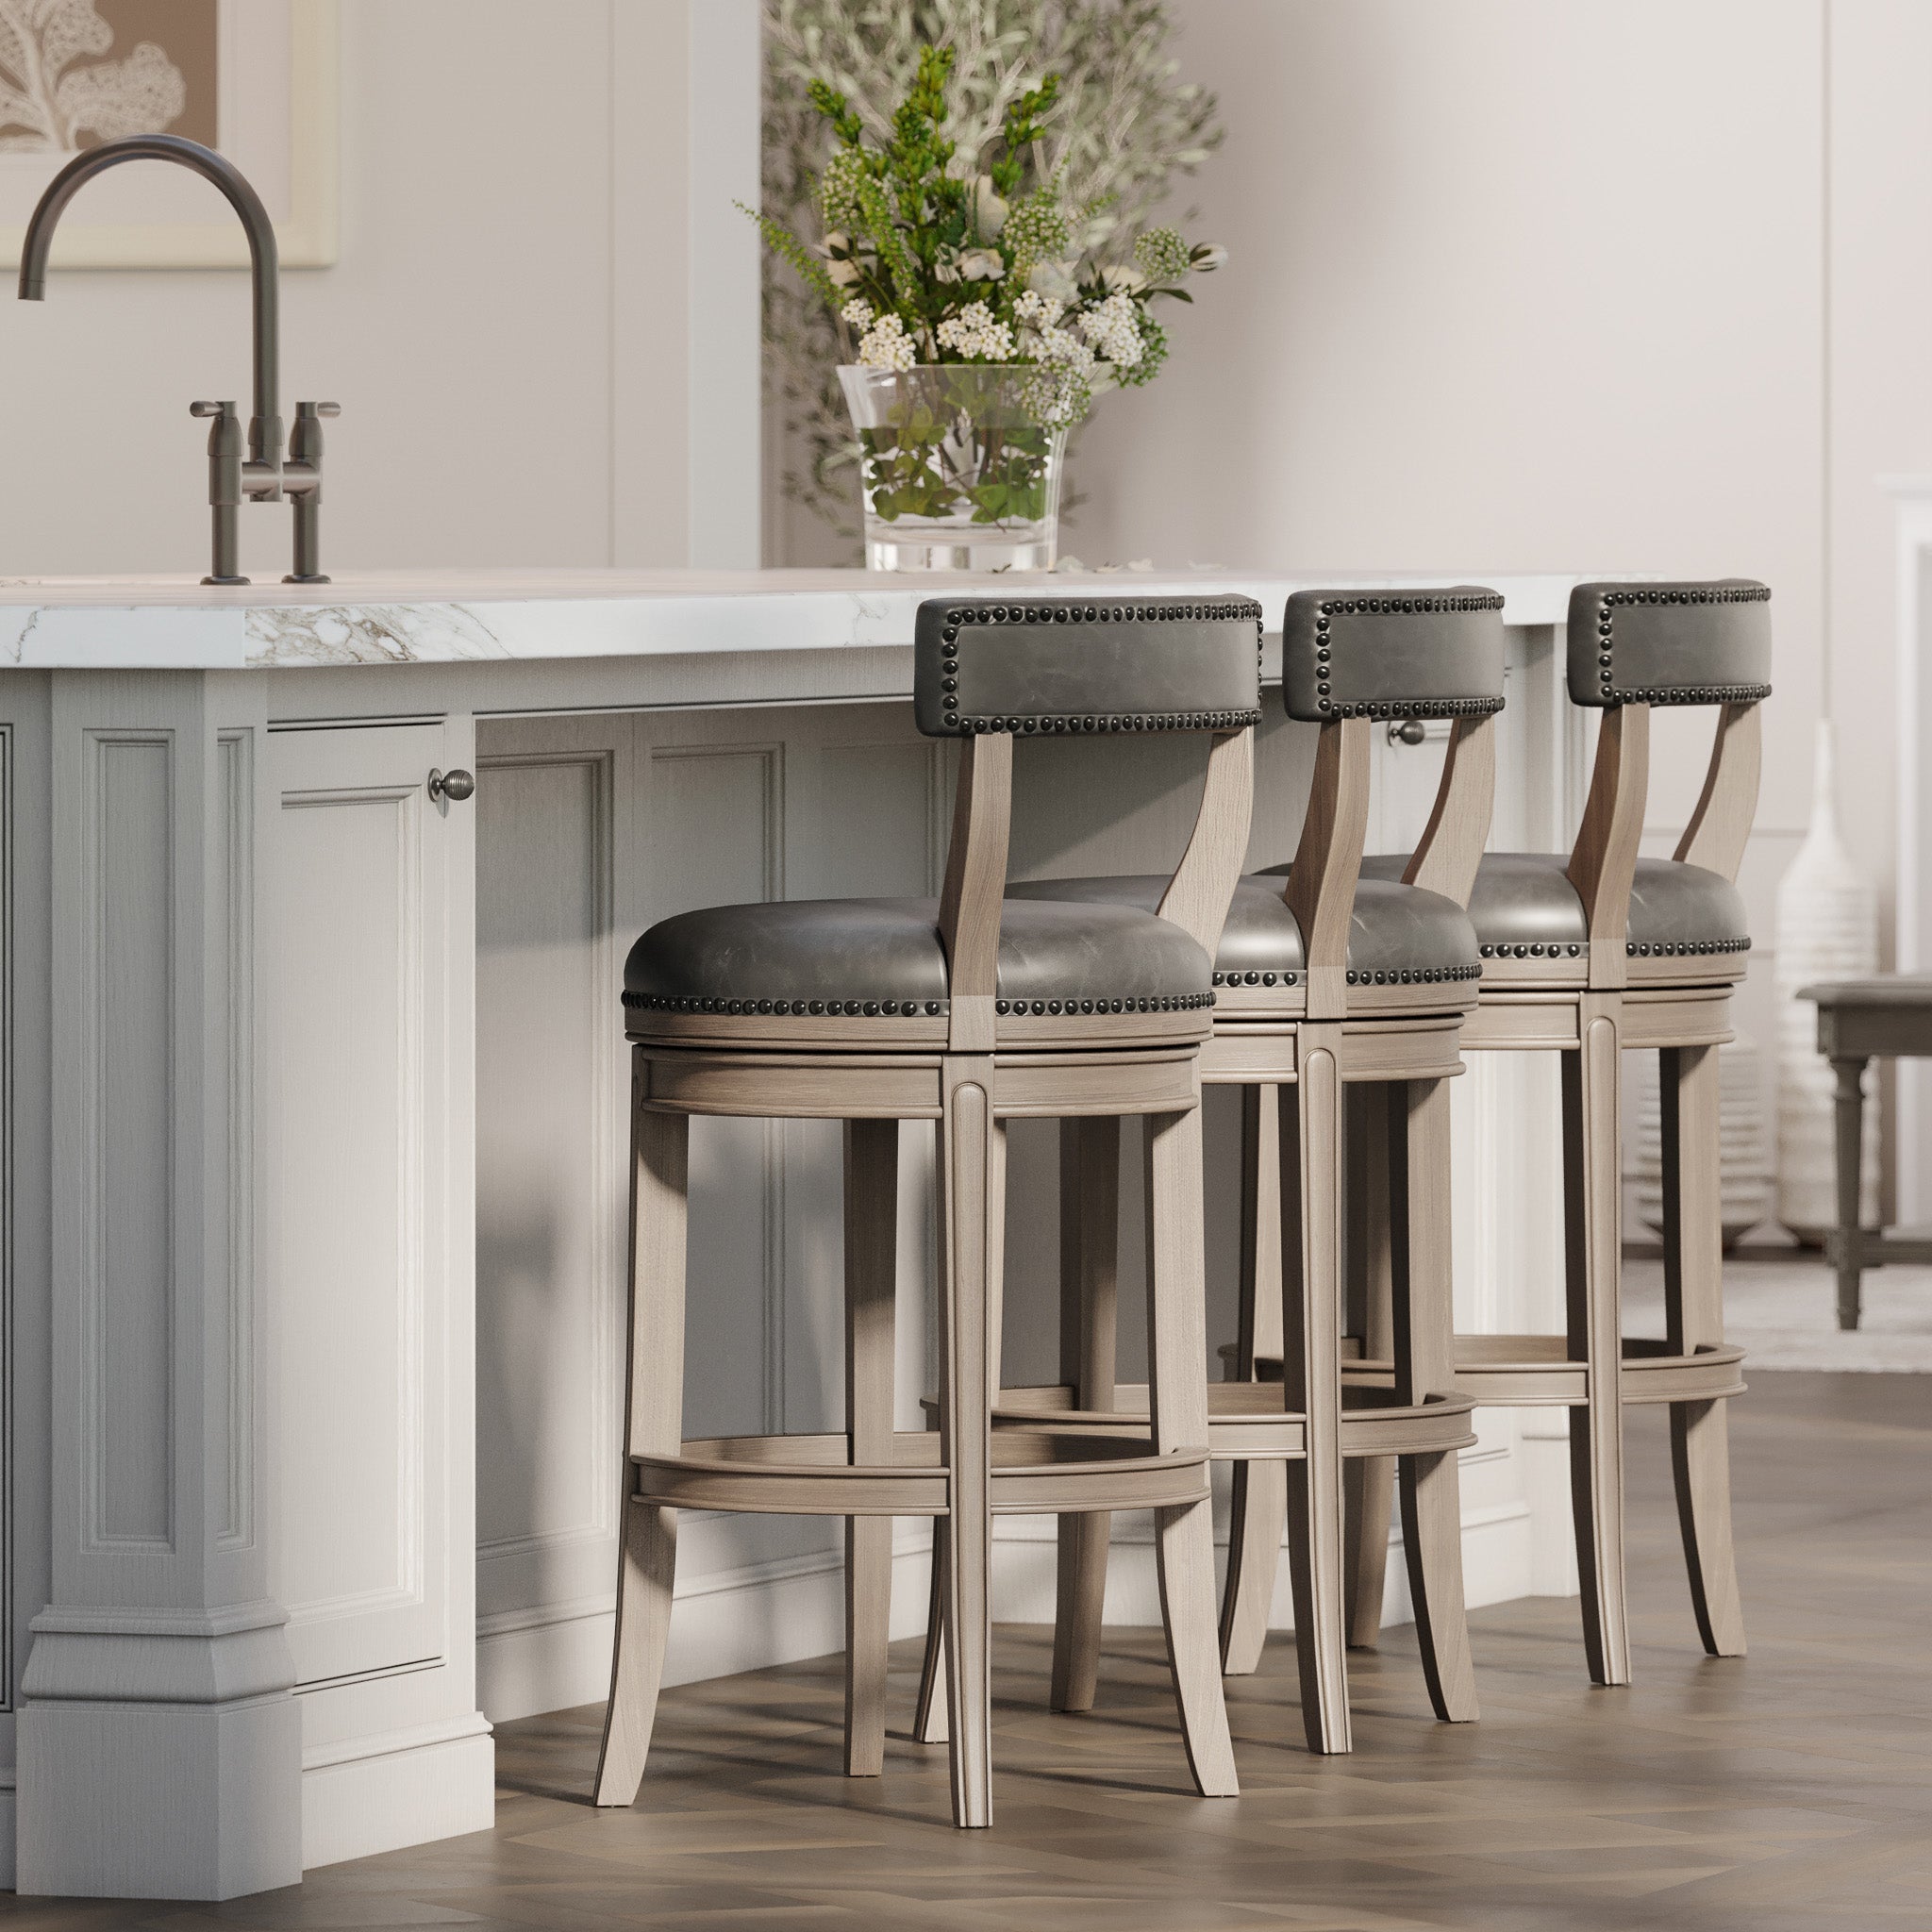 Alexander Bar Stool in Reclaimed Oak Finish with Ronan Stone Vegan Leather in Stools by Maven Lane